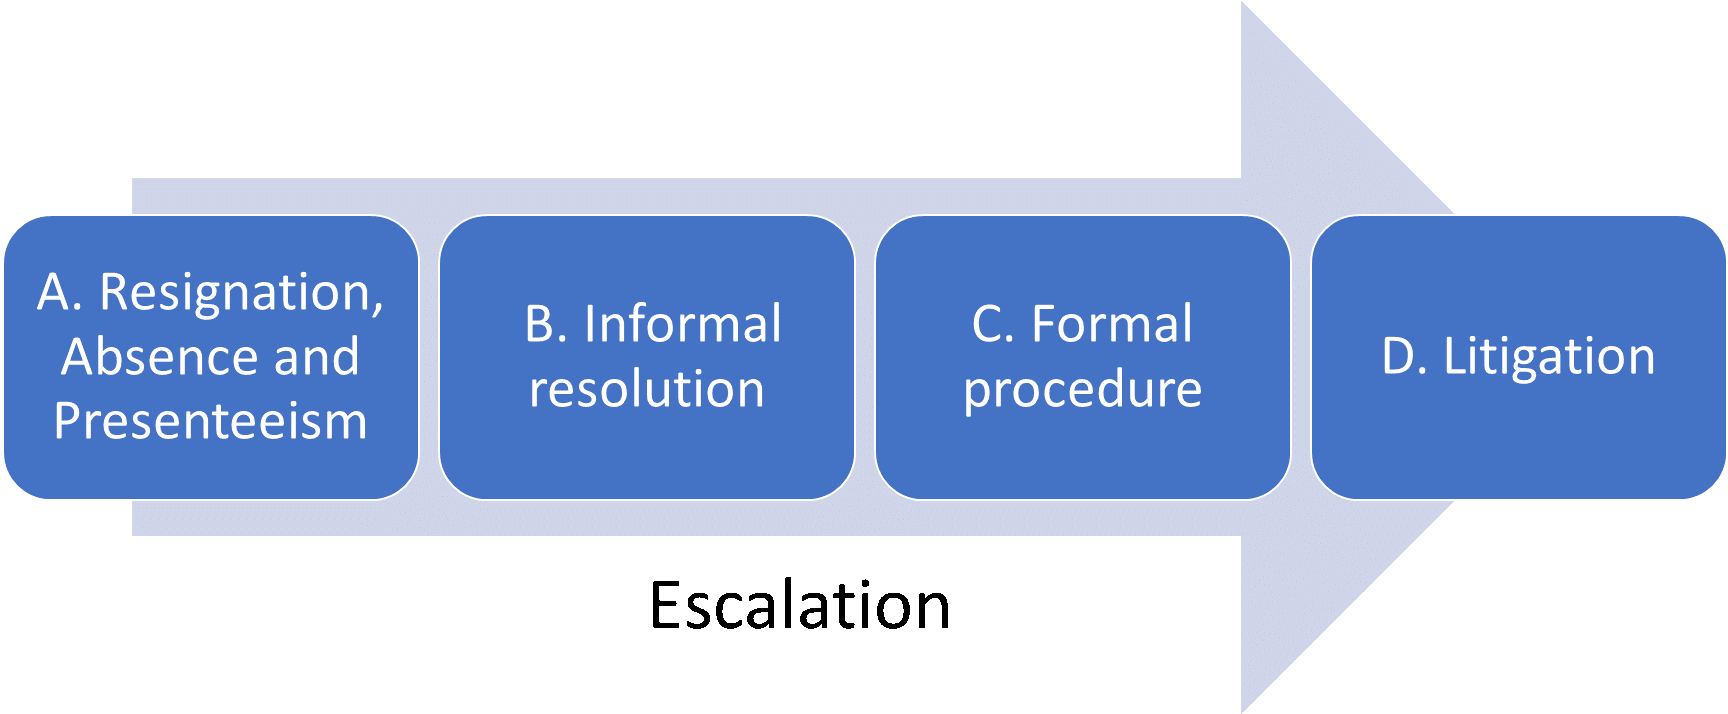 A: Resignation, absence and presenteeism. B: Information resolution. C: Formal procedure. D: Litigation. More information is in the surrounding text.